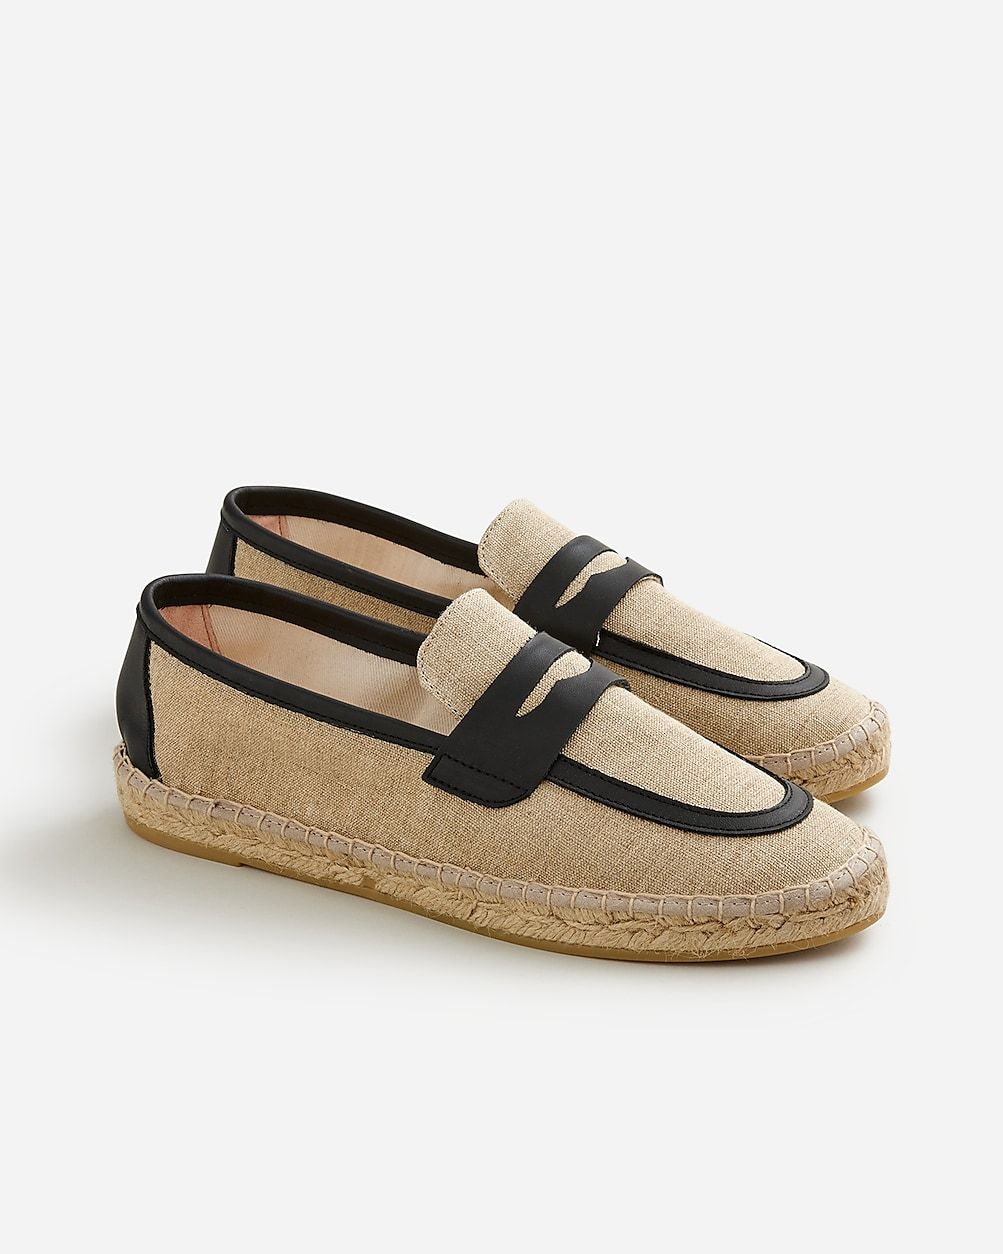 Made-in-Spain loafer espadrilles in linen blend and leather | J.Crew US